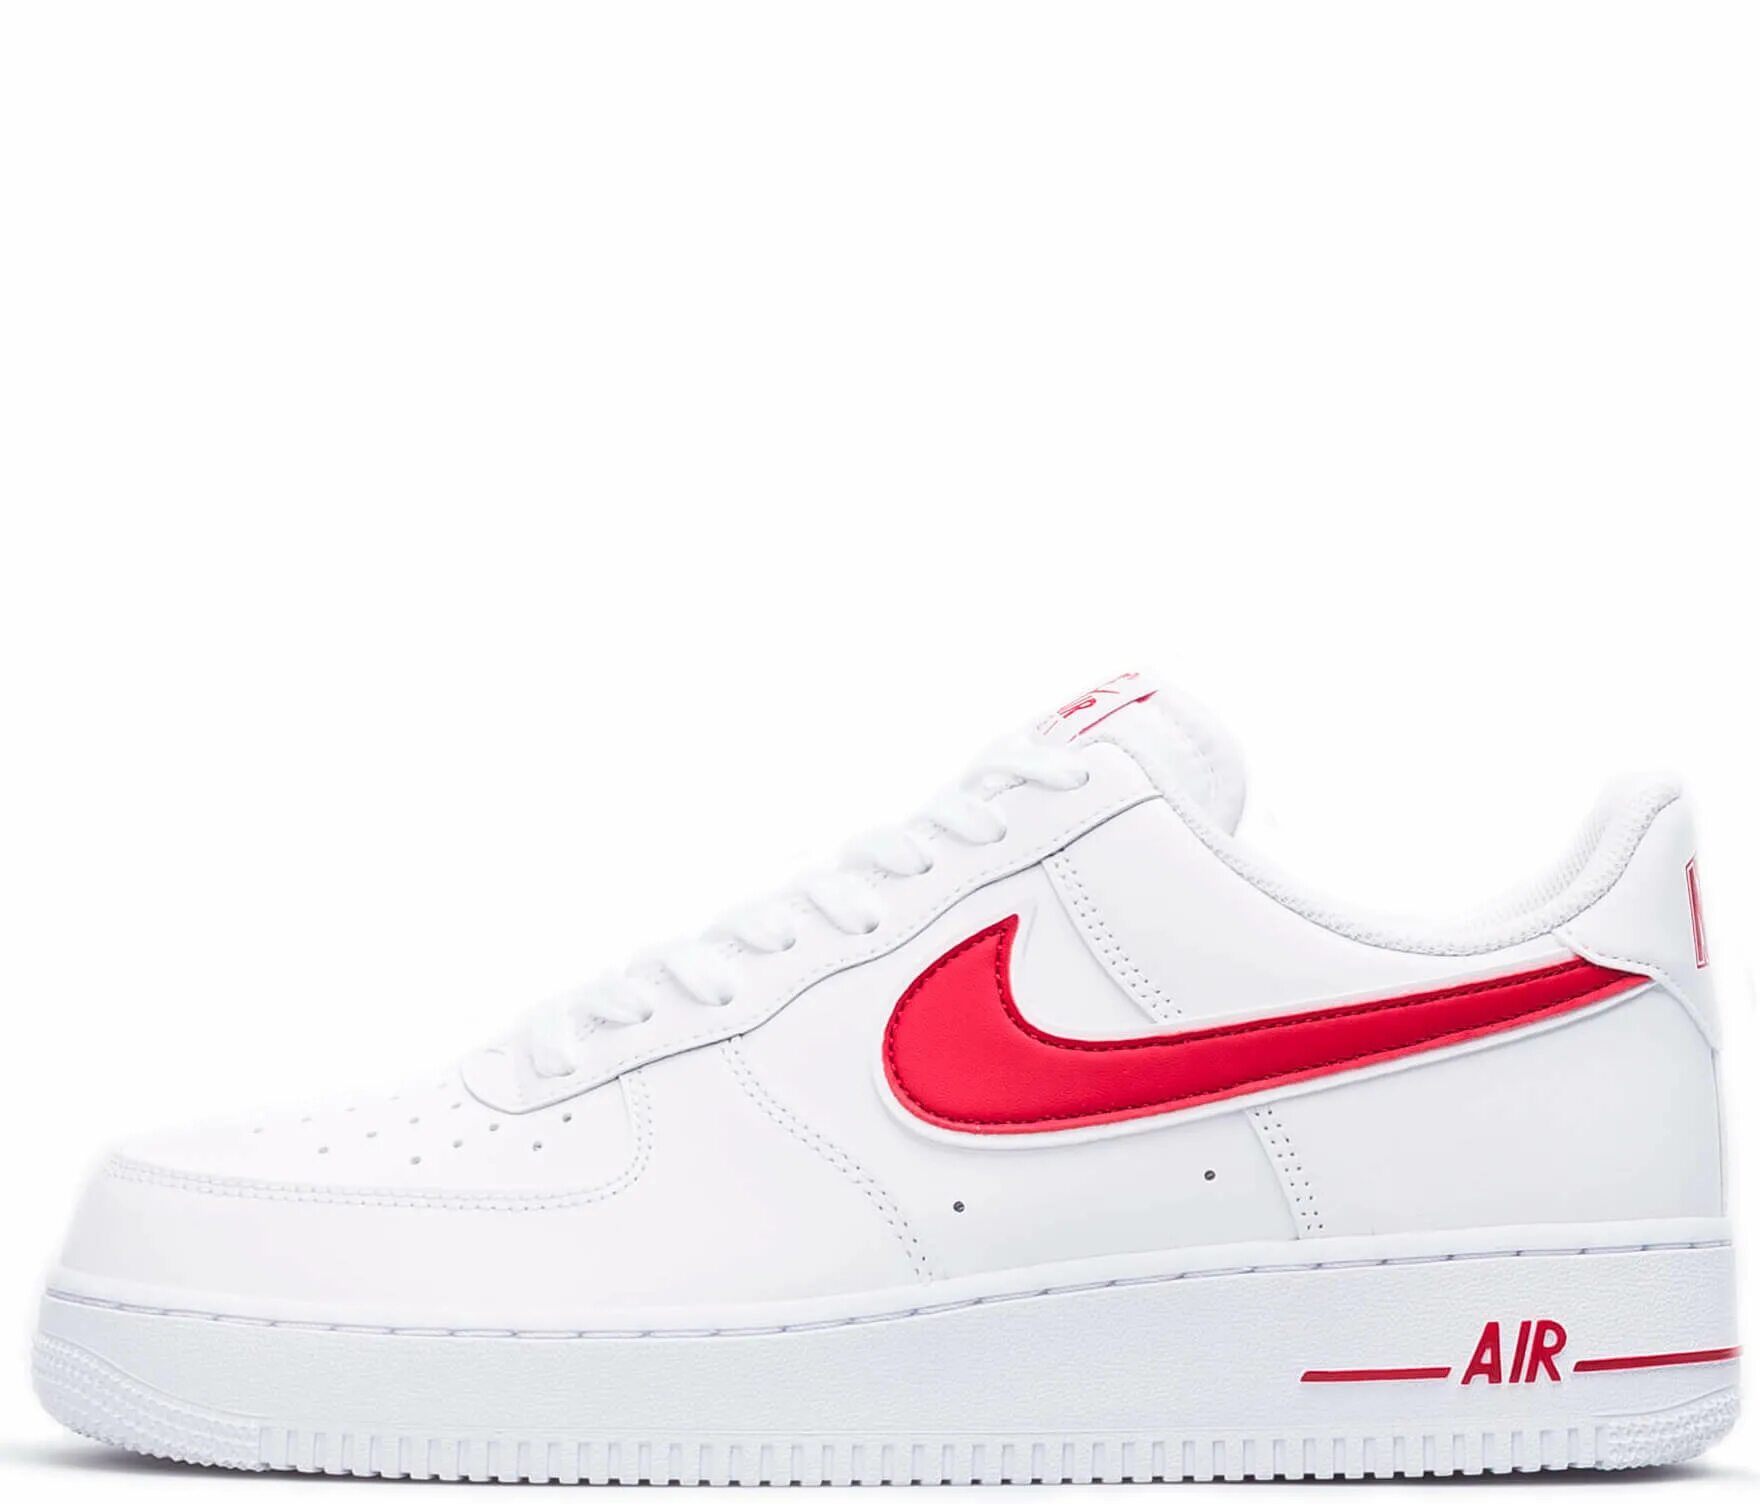 Nike Air Force 1 Low White Red. Nike Air Force 1 lv8 White/Red. Nike Air Force 1 White Red. Nike Air Force 1 lv8 White. Найк force 1